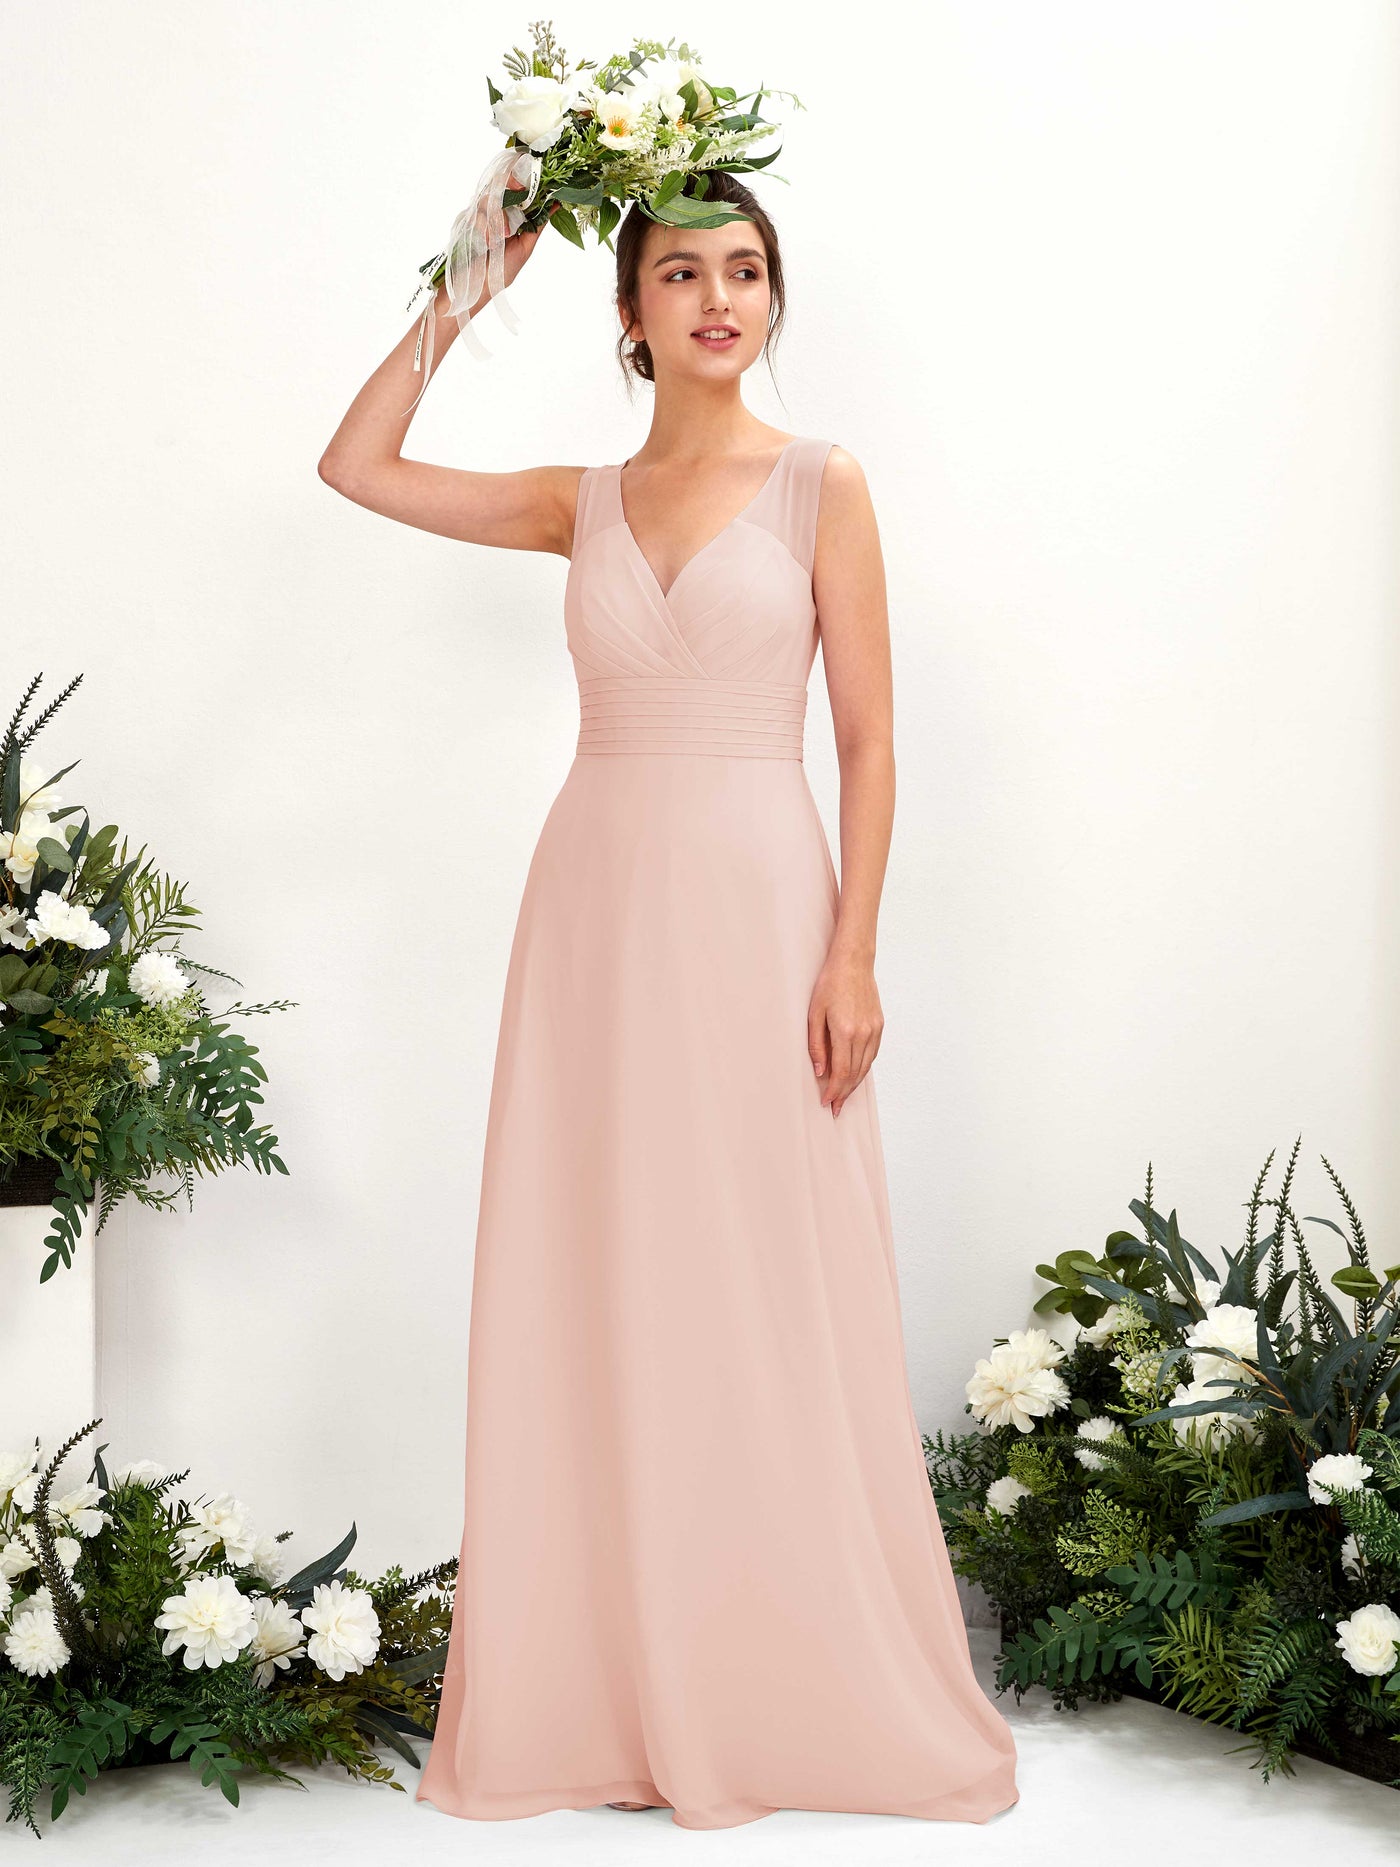 Pearl Pink Bridesmaid Dresses Bridesmaid Dress A-line Chiffon Straps Full Length Sleeveless Wedding Party Dress (81220908)#color_pearl-pink